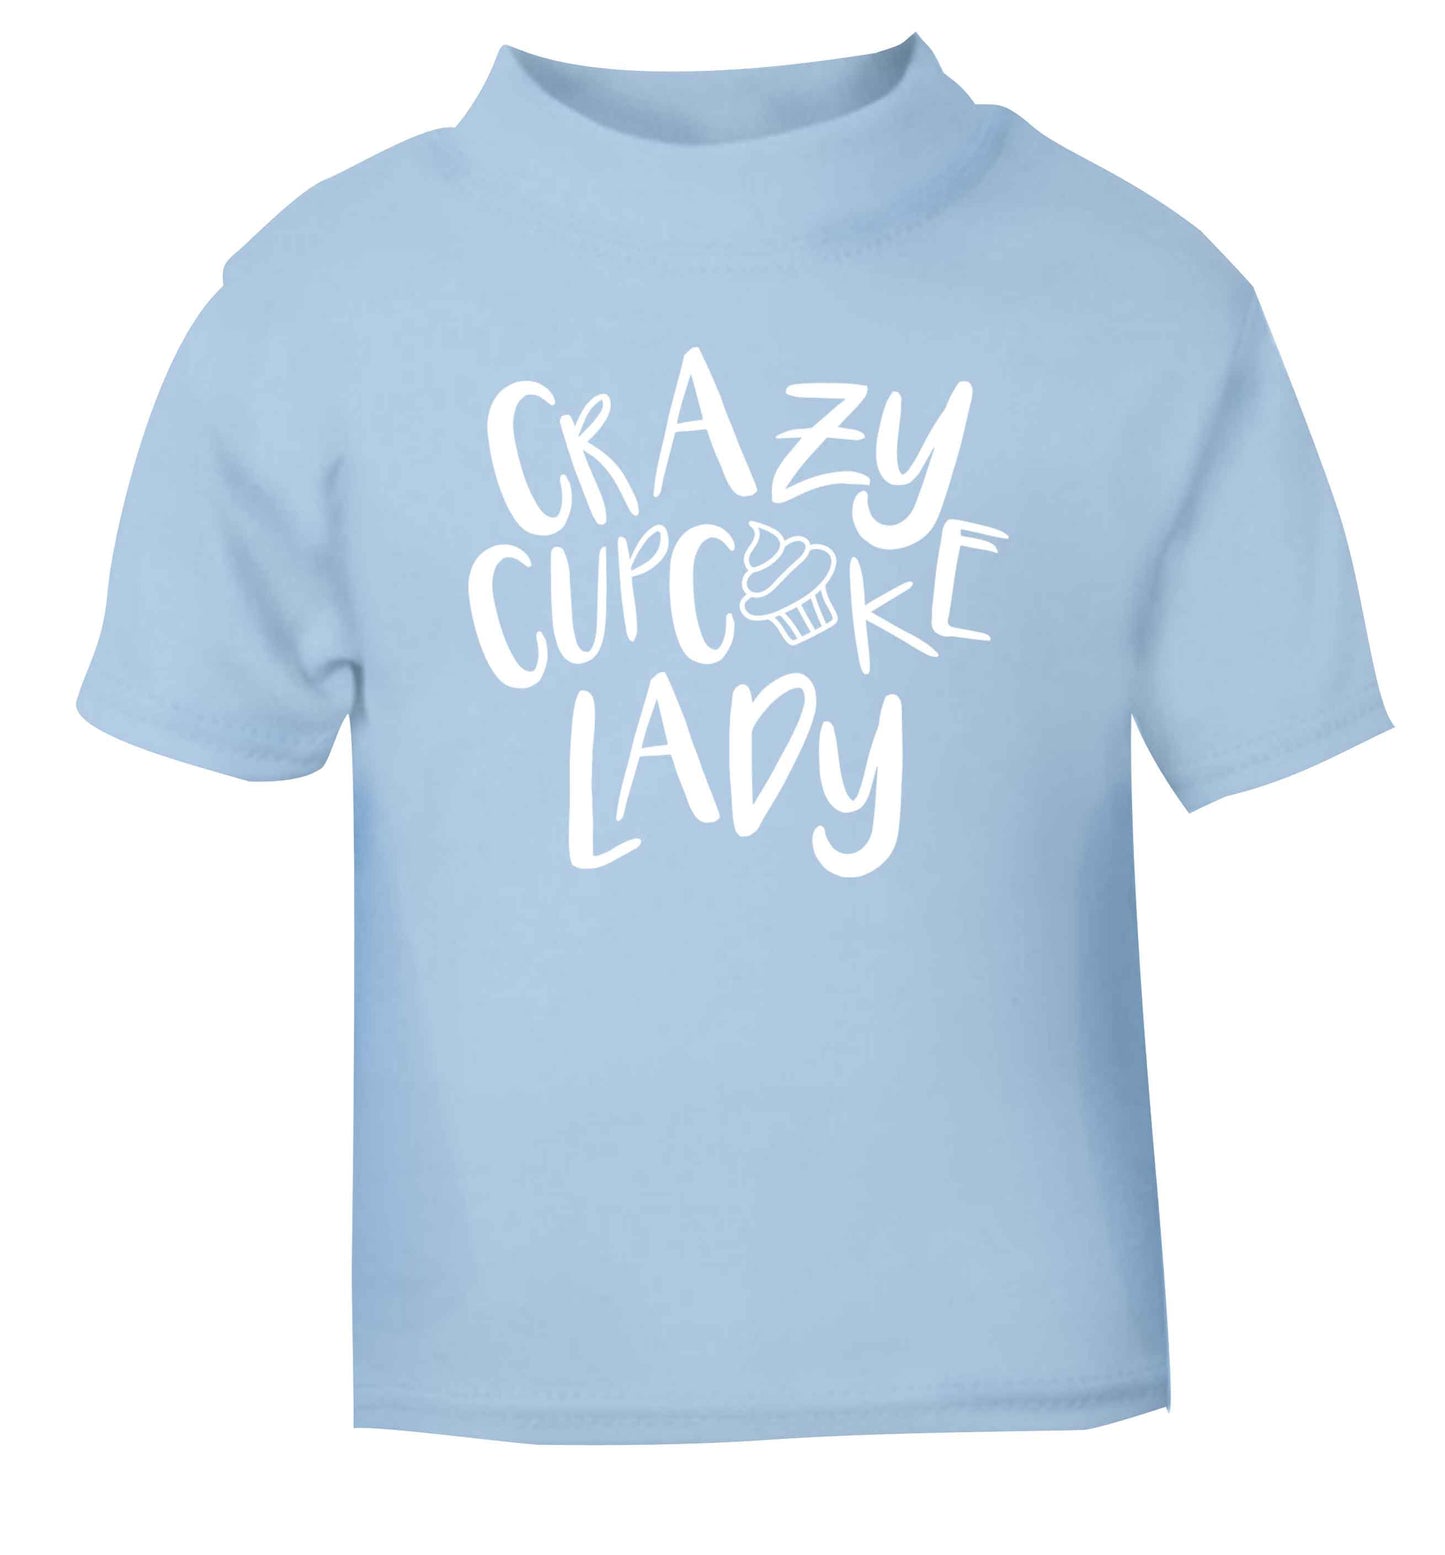 Crazy cupcake lady light blue Baby Toddler Tshirt 2 Years